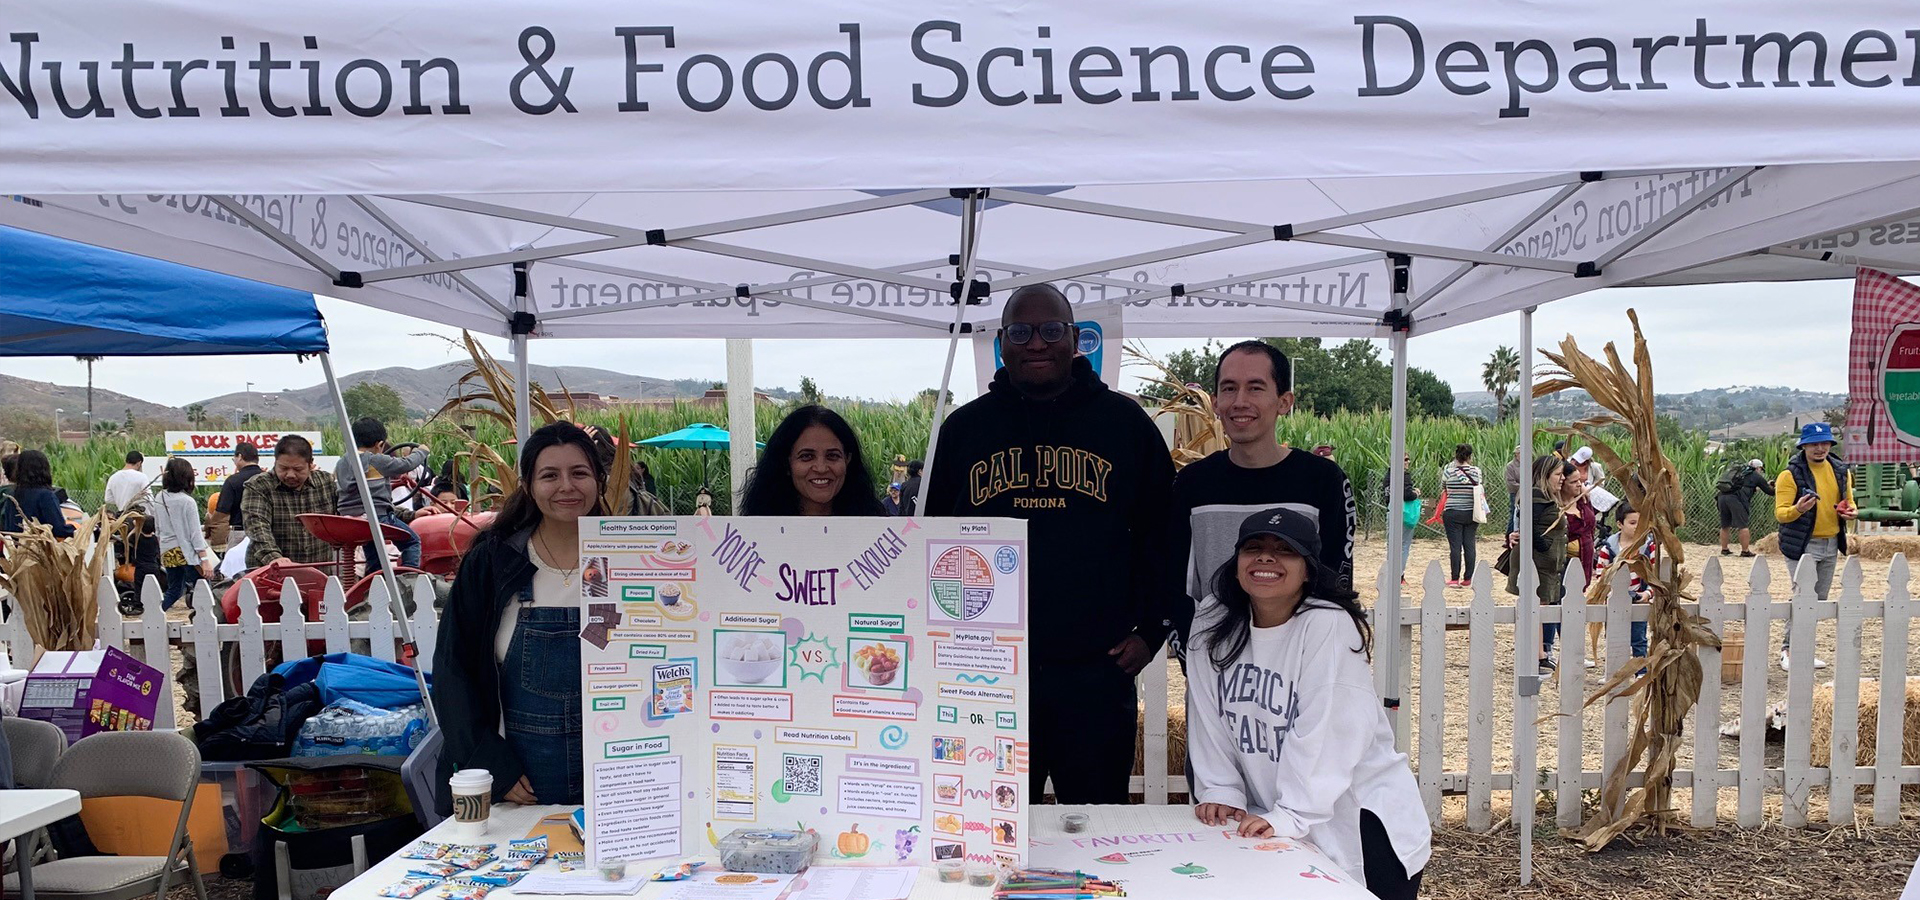 Nutrition students pose at their booth